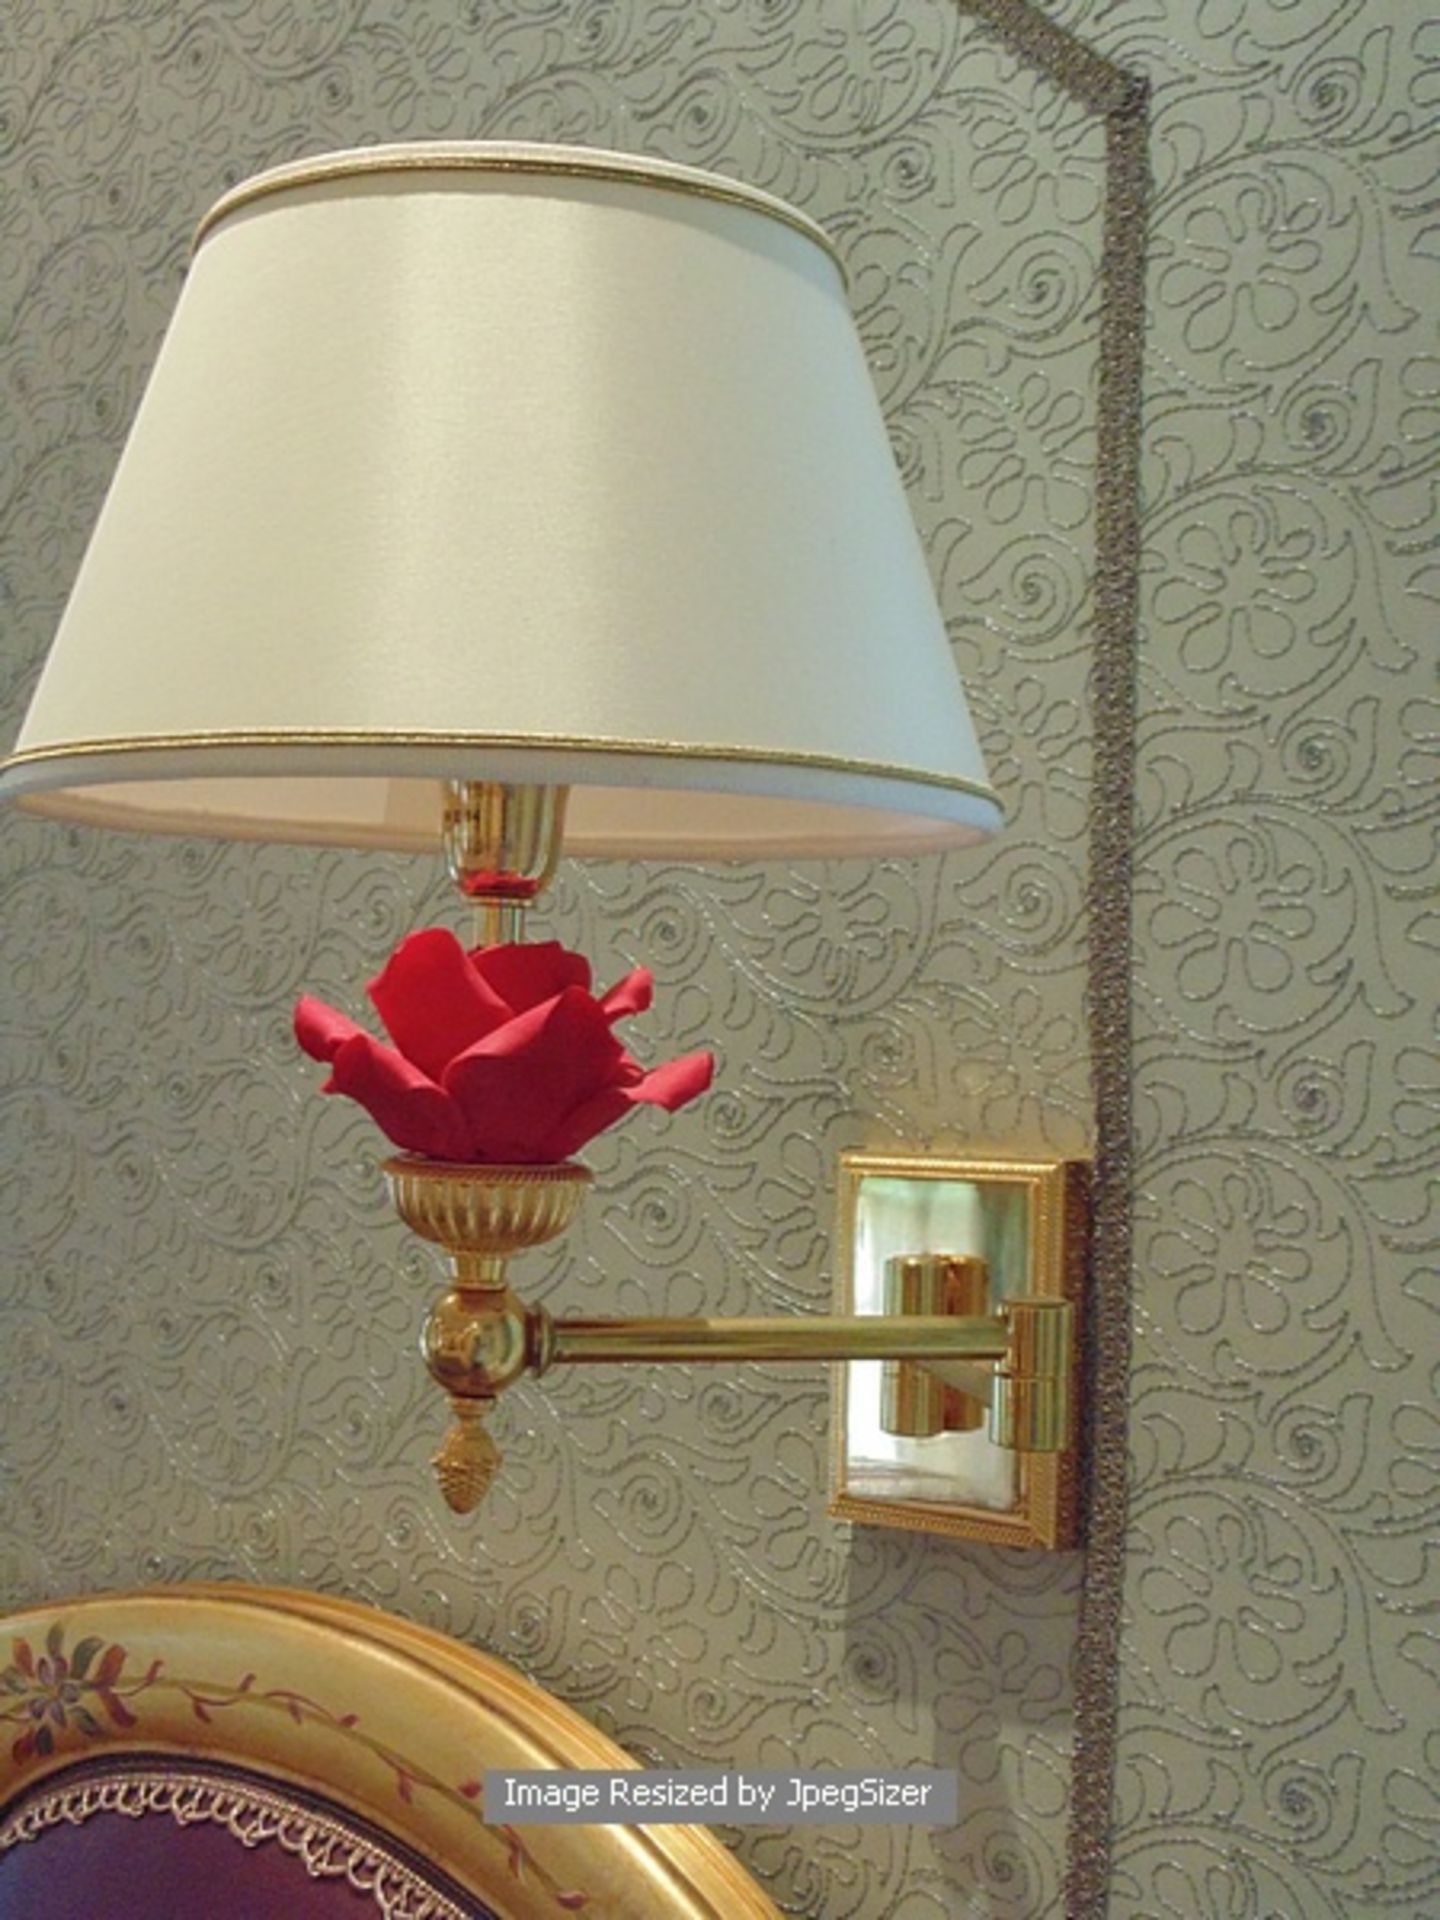 A pair of Laudarte T420 cantilever wall sconces bronze castings, with Capodimonte roses in red 24ct.